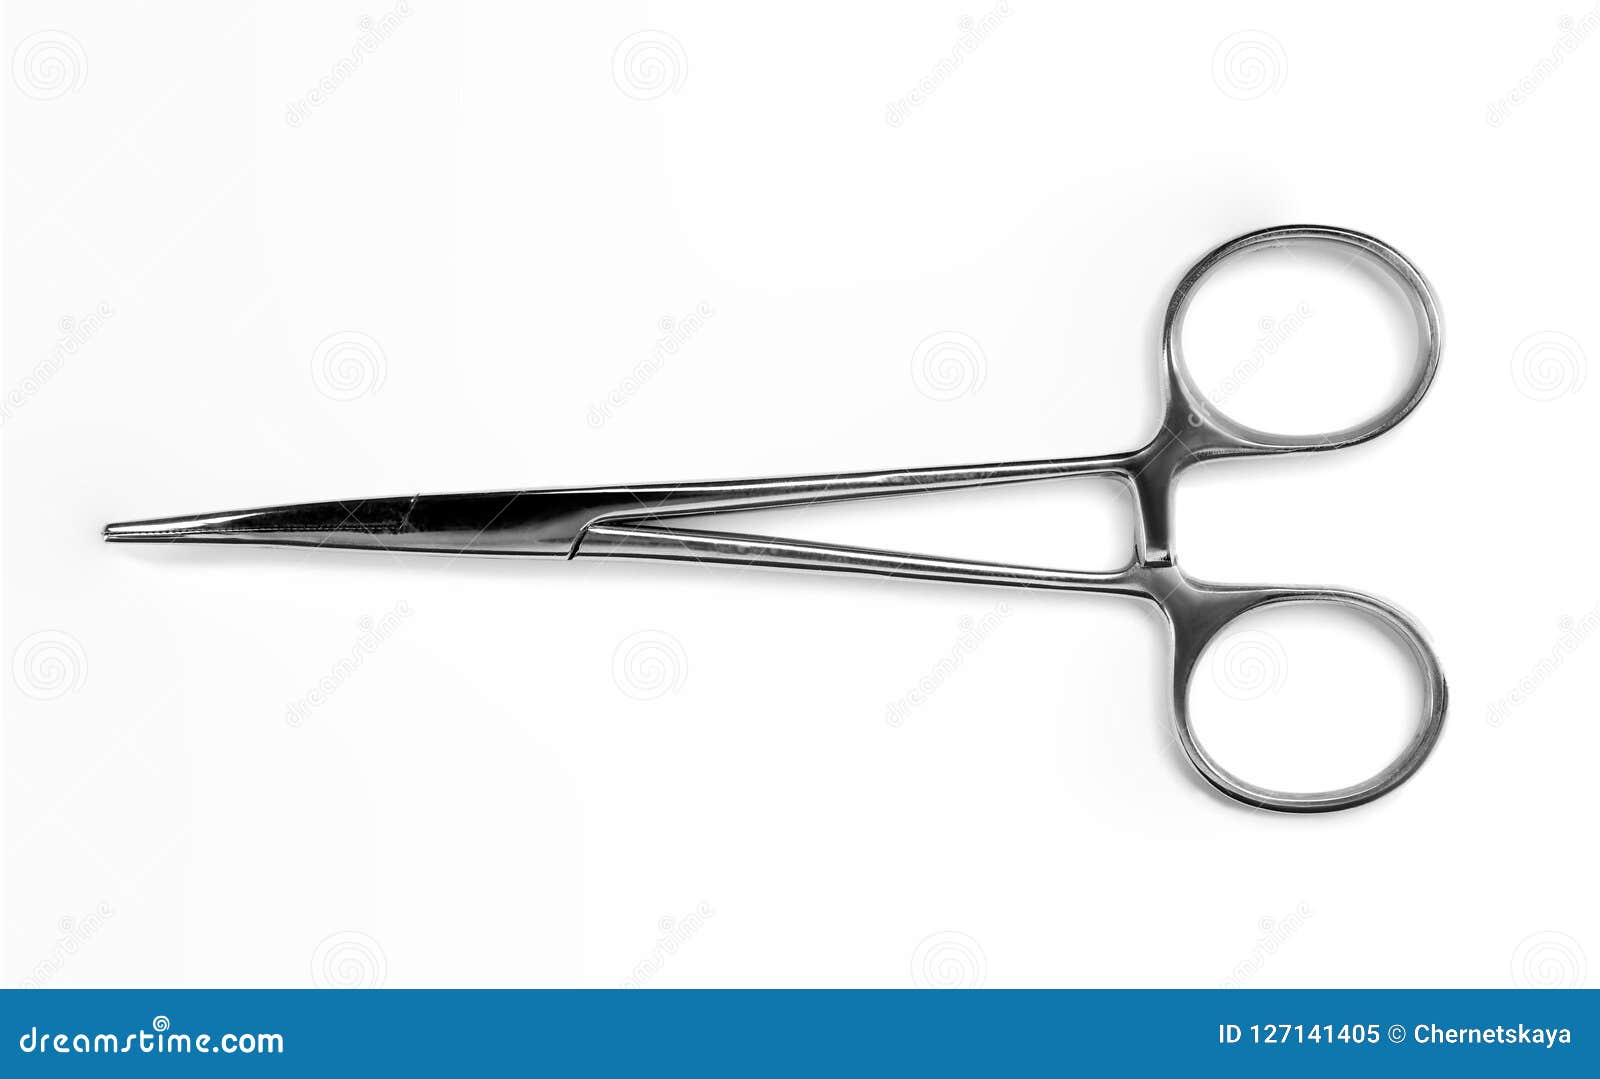 Surgical Forceps on White Background, Top View Stock Image - Image of ...